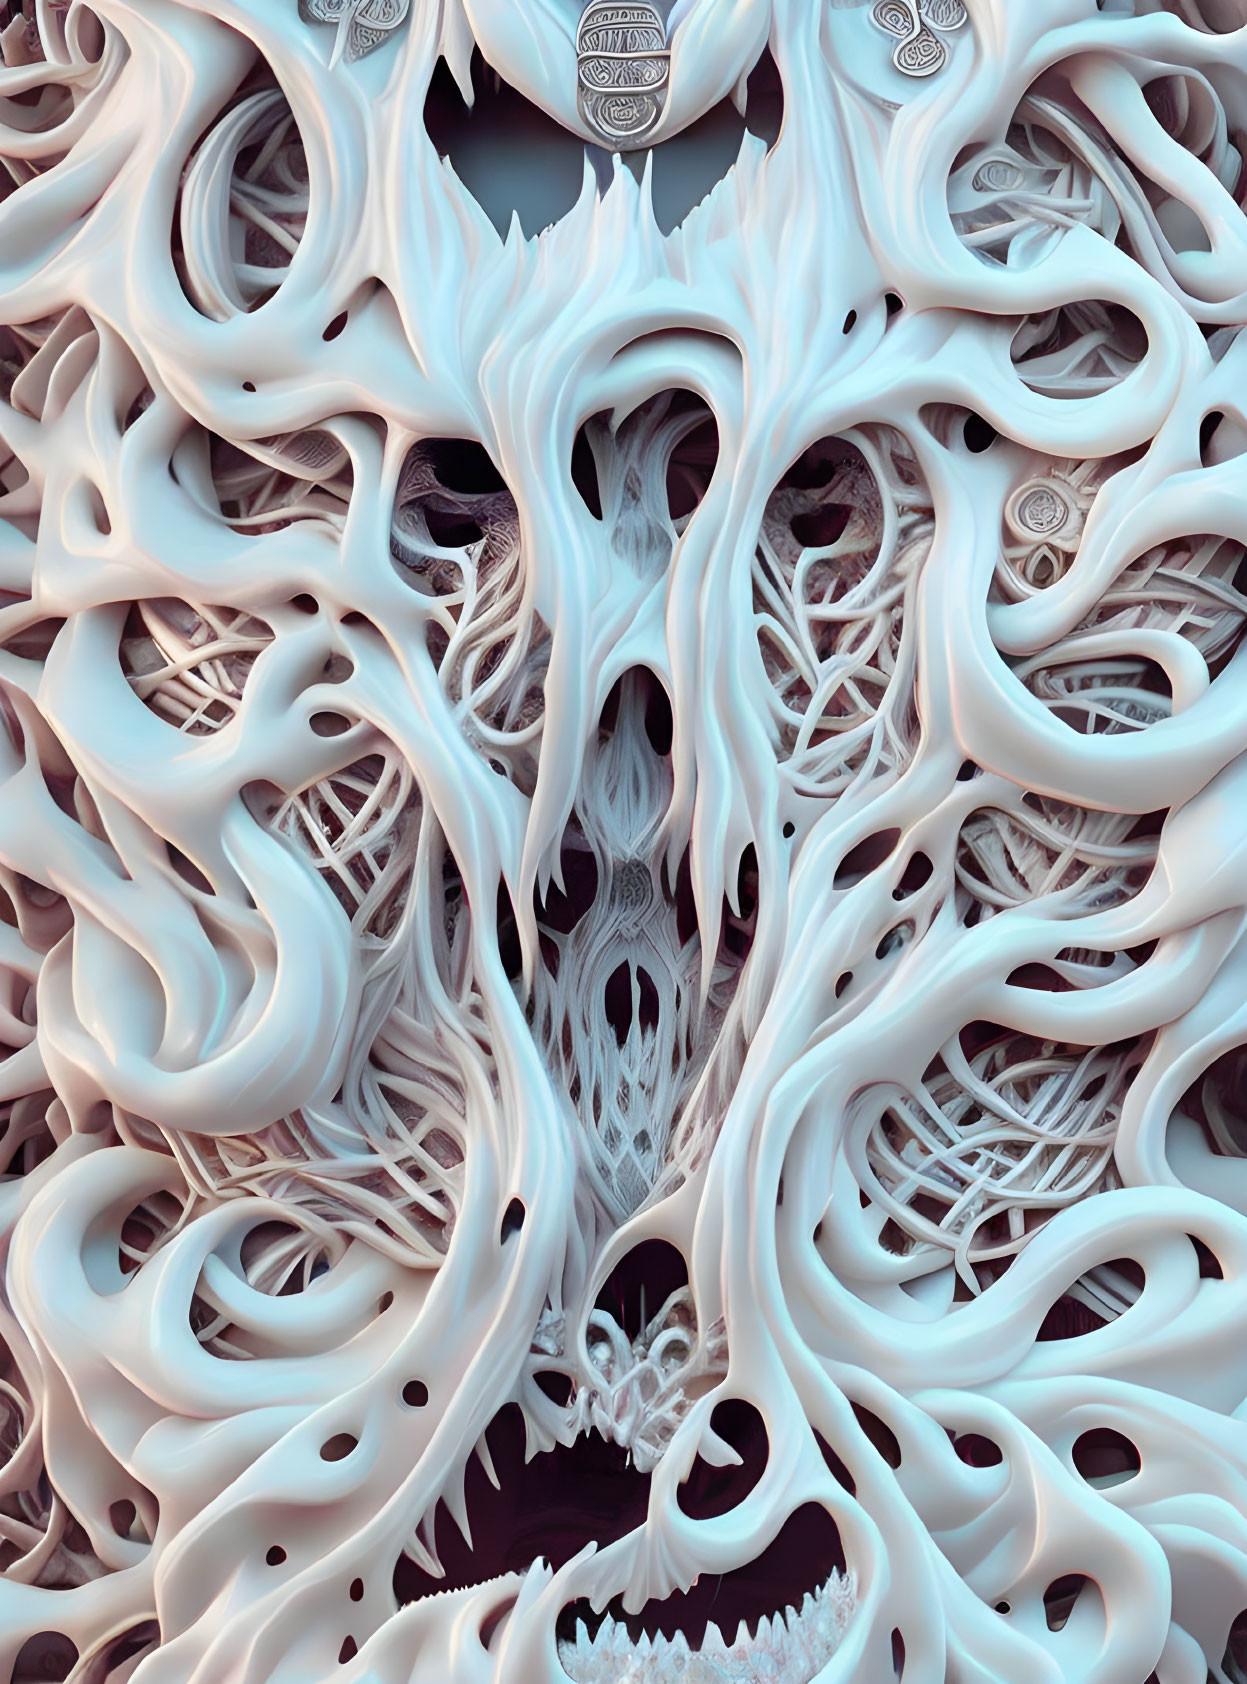 Detailed Fractal Design with Bone-like Structures in White and Beige